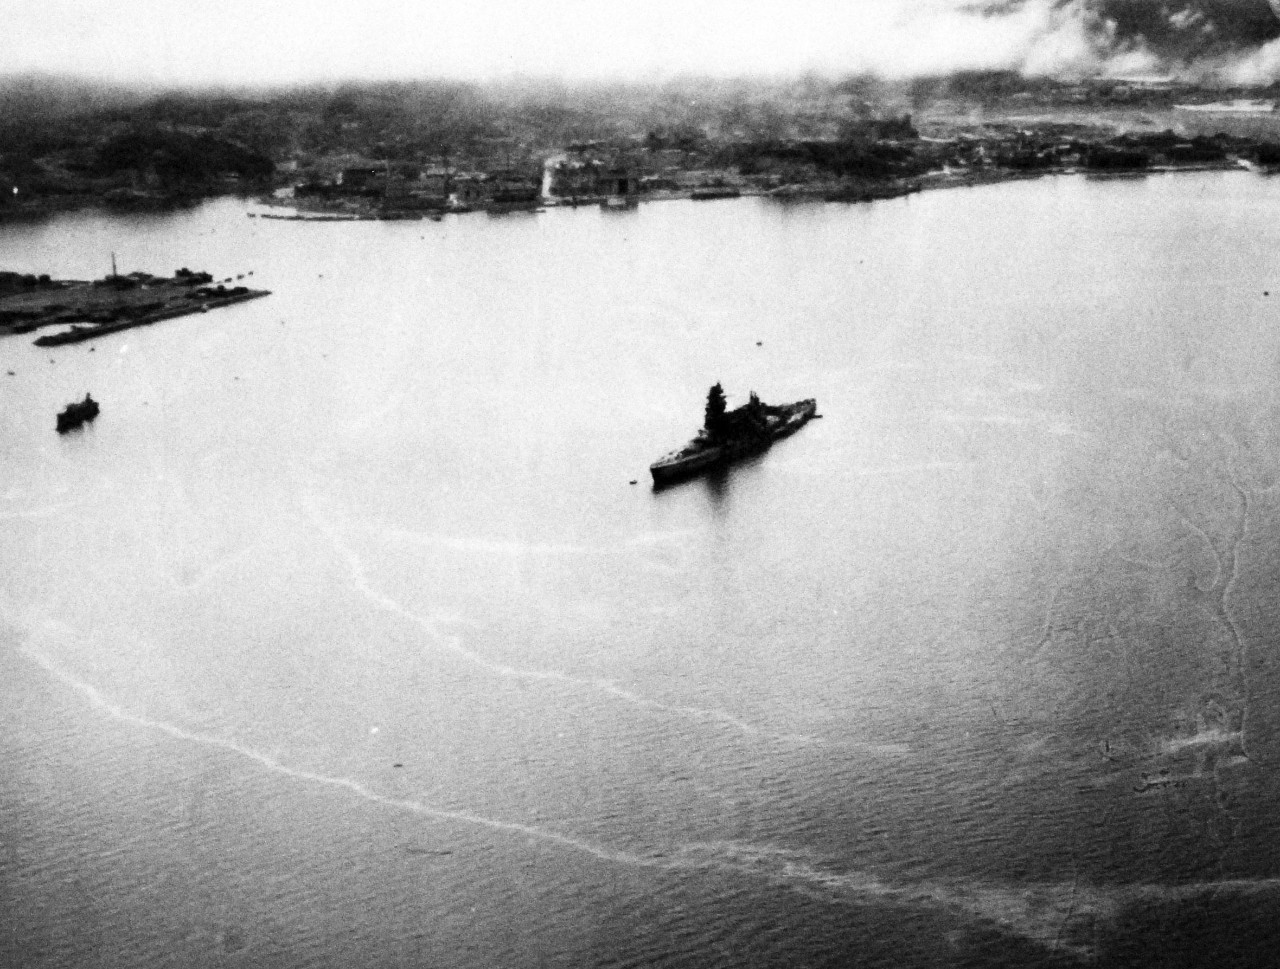 80-G-343773:  Japanese battleship Nagato, 1945.       The badly damaged Japanese battleship Nagato off Yokosuka Naval Air Station, Japan, as seen from plane of USS Shangri La (CV-38).    Photographed by Photographer’s Mate Second Class J. Guttoach, August 26, 1945.   Official U.S. Navy Photograph, now in the collections of the U.S. National Archives.   (2014/5/22). 